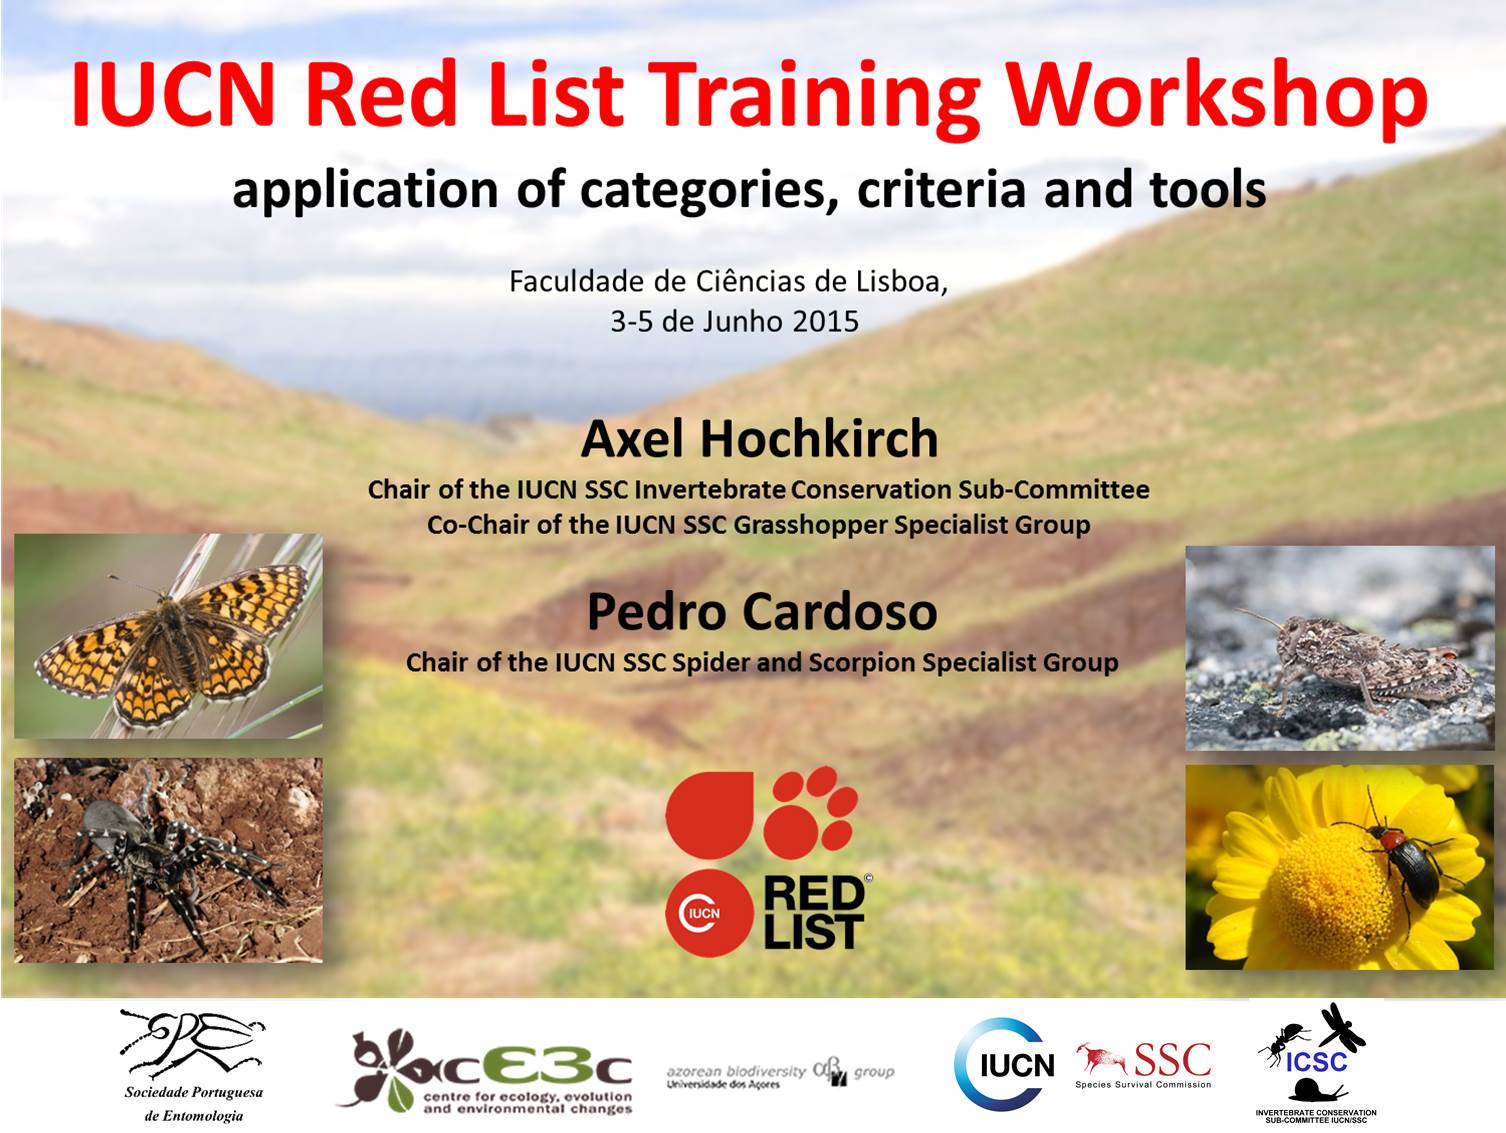 IUCN Red List Training Workshop: application of categories, criteria and tools